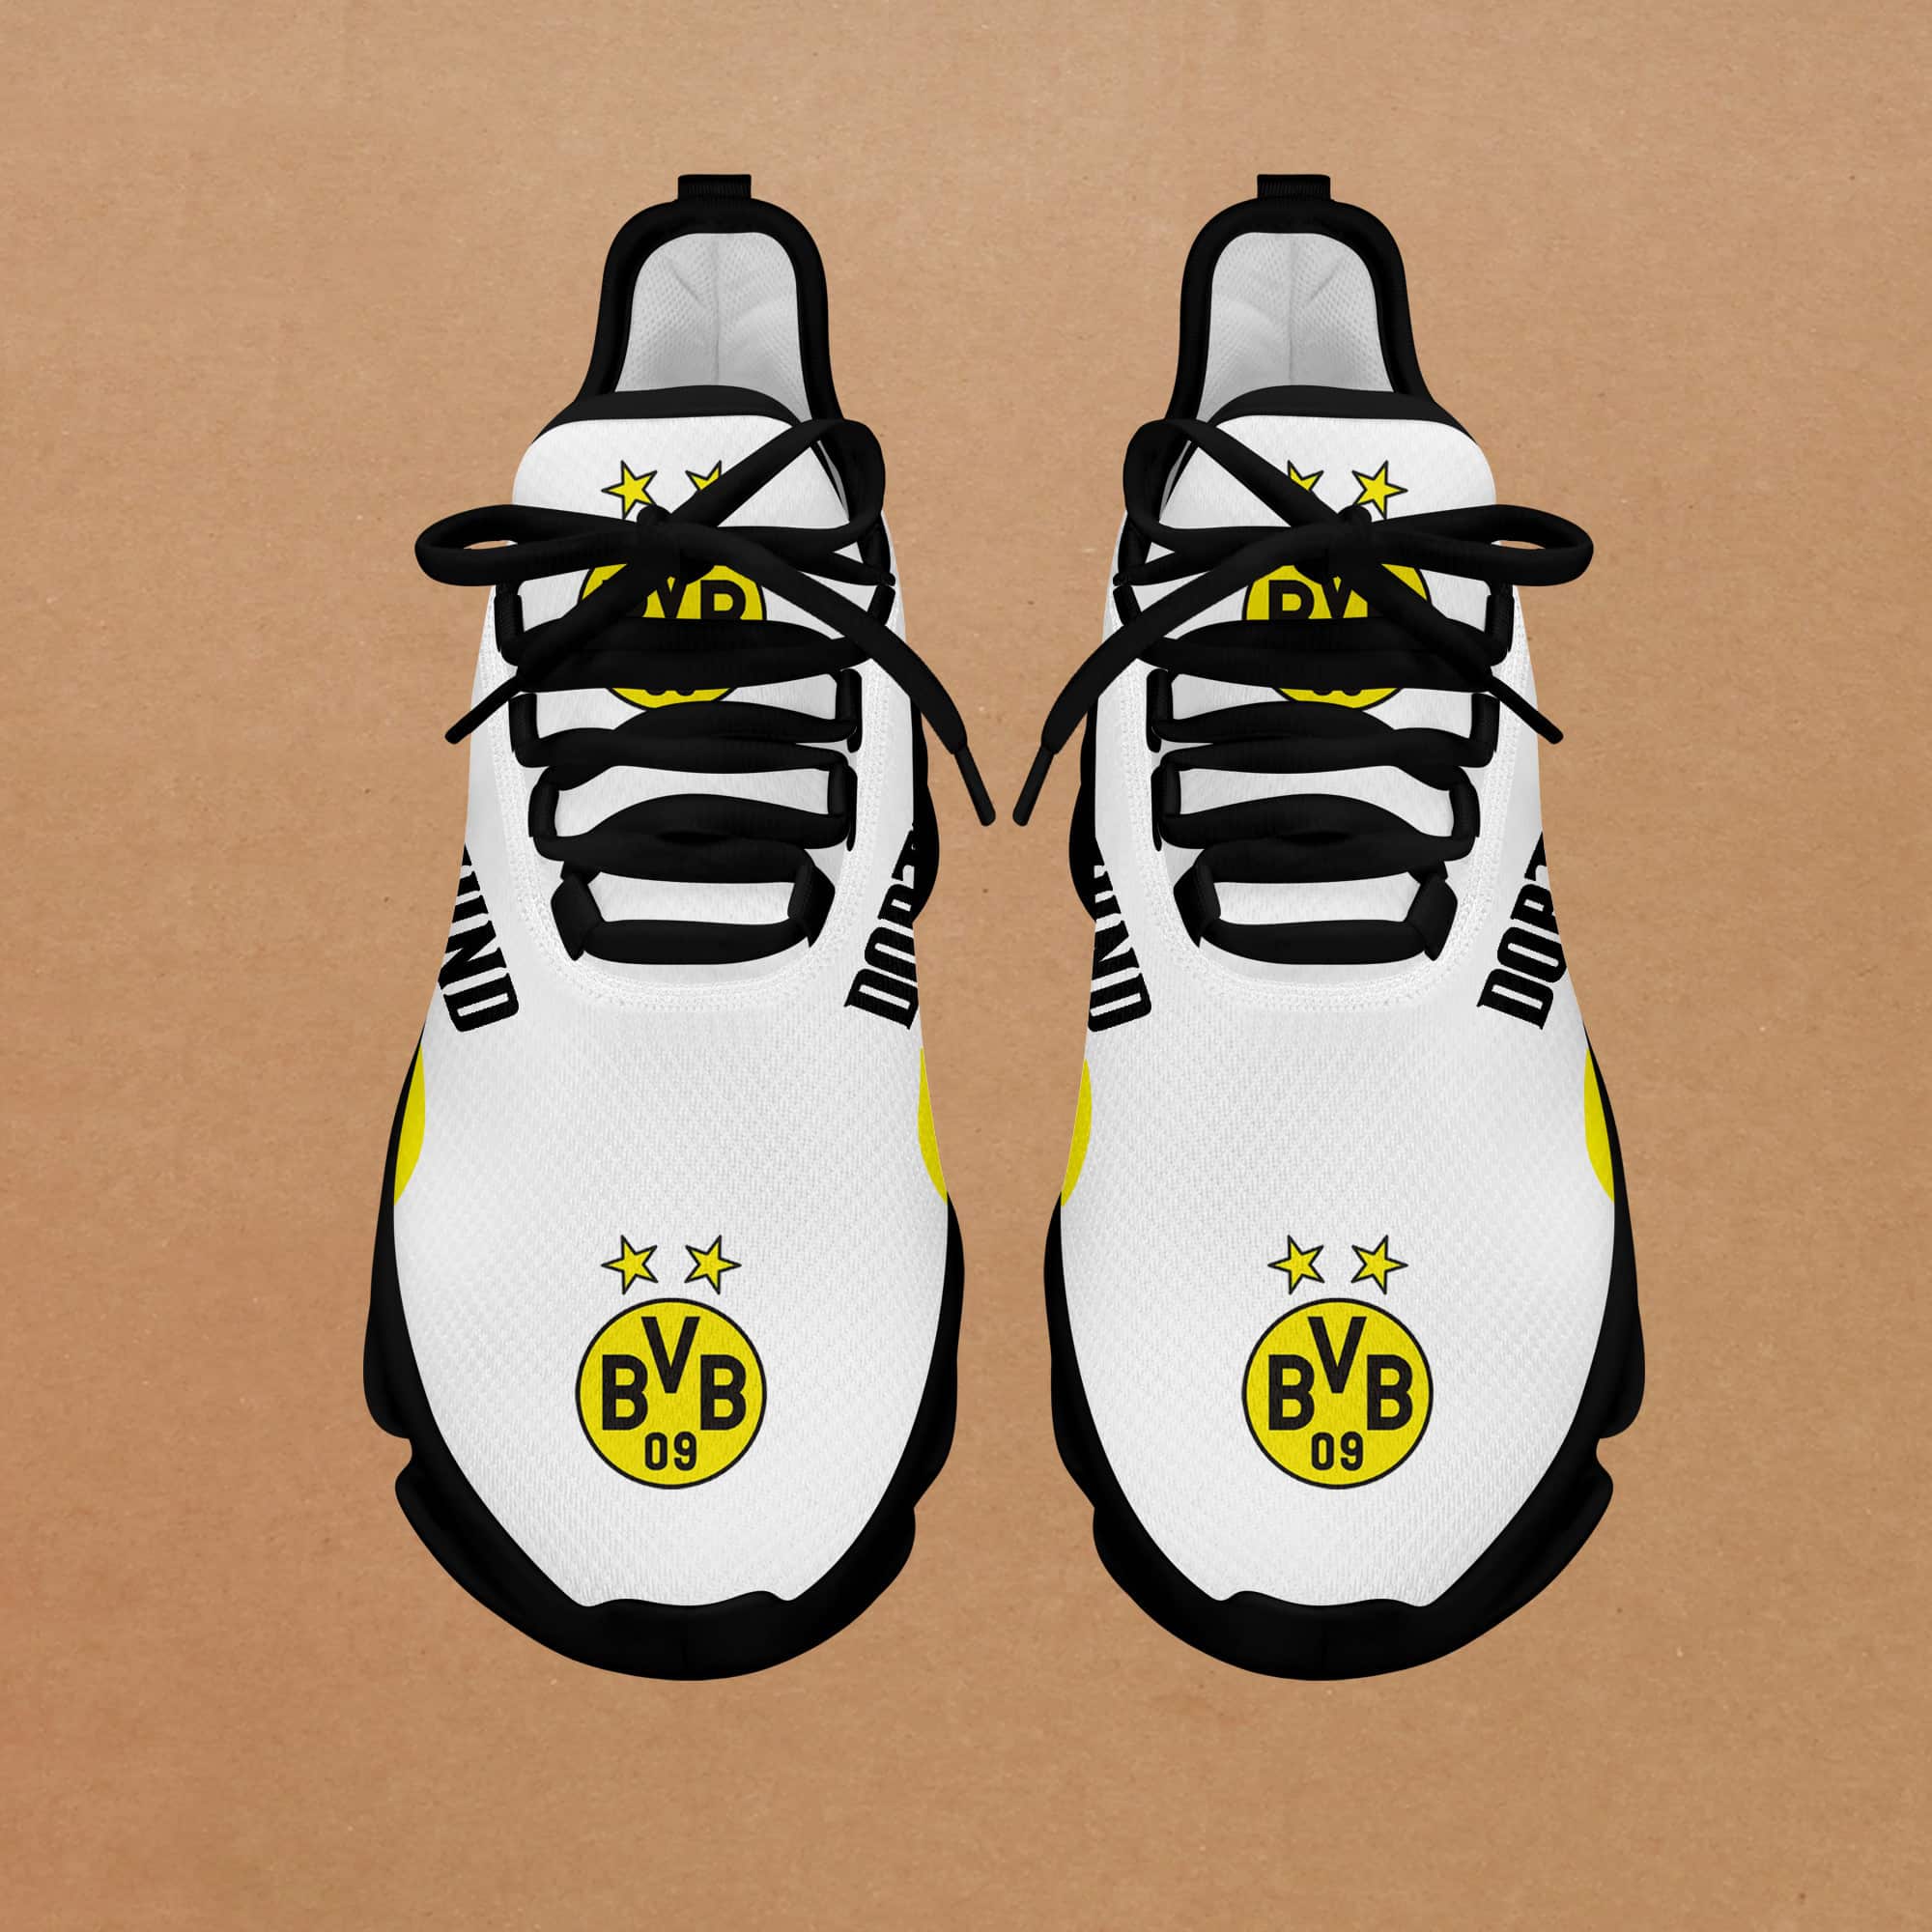 Borussia Dortmund Running Shoes Max Soul Shoes Sneakers Ver 7 4